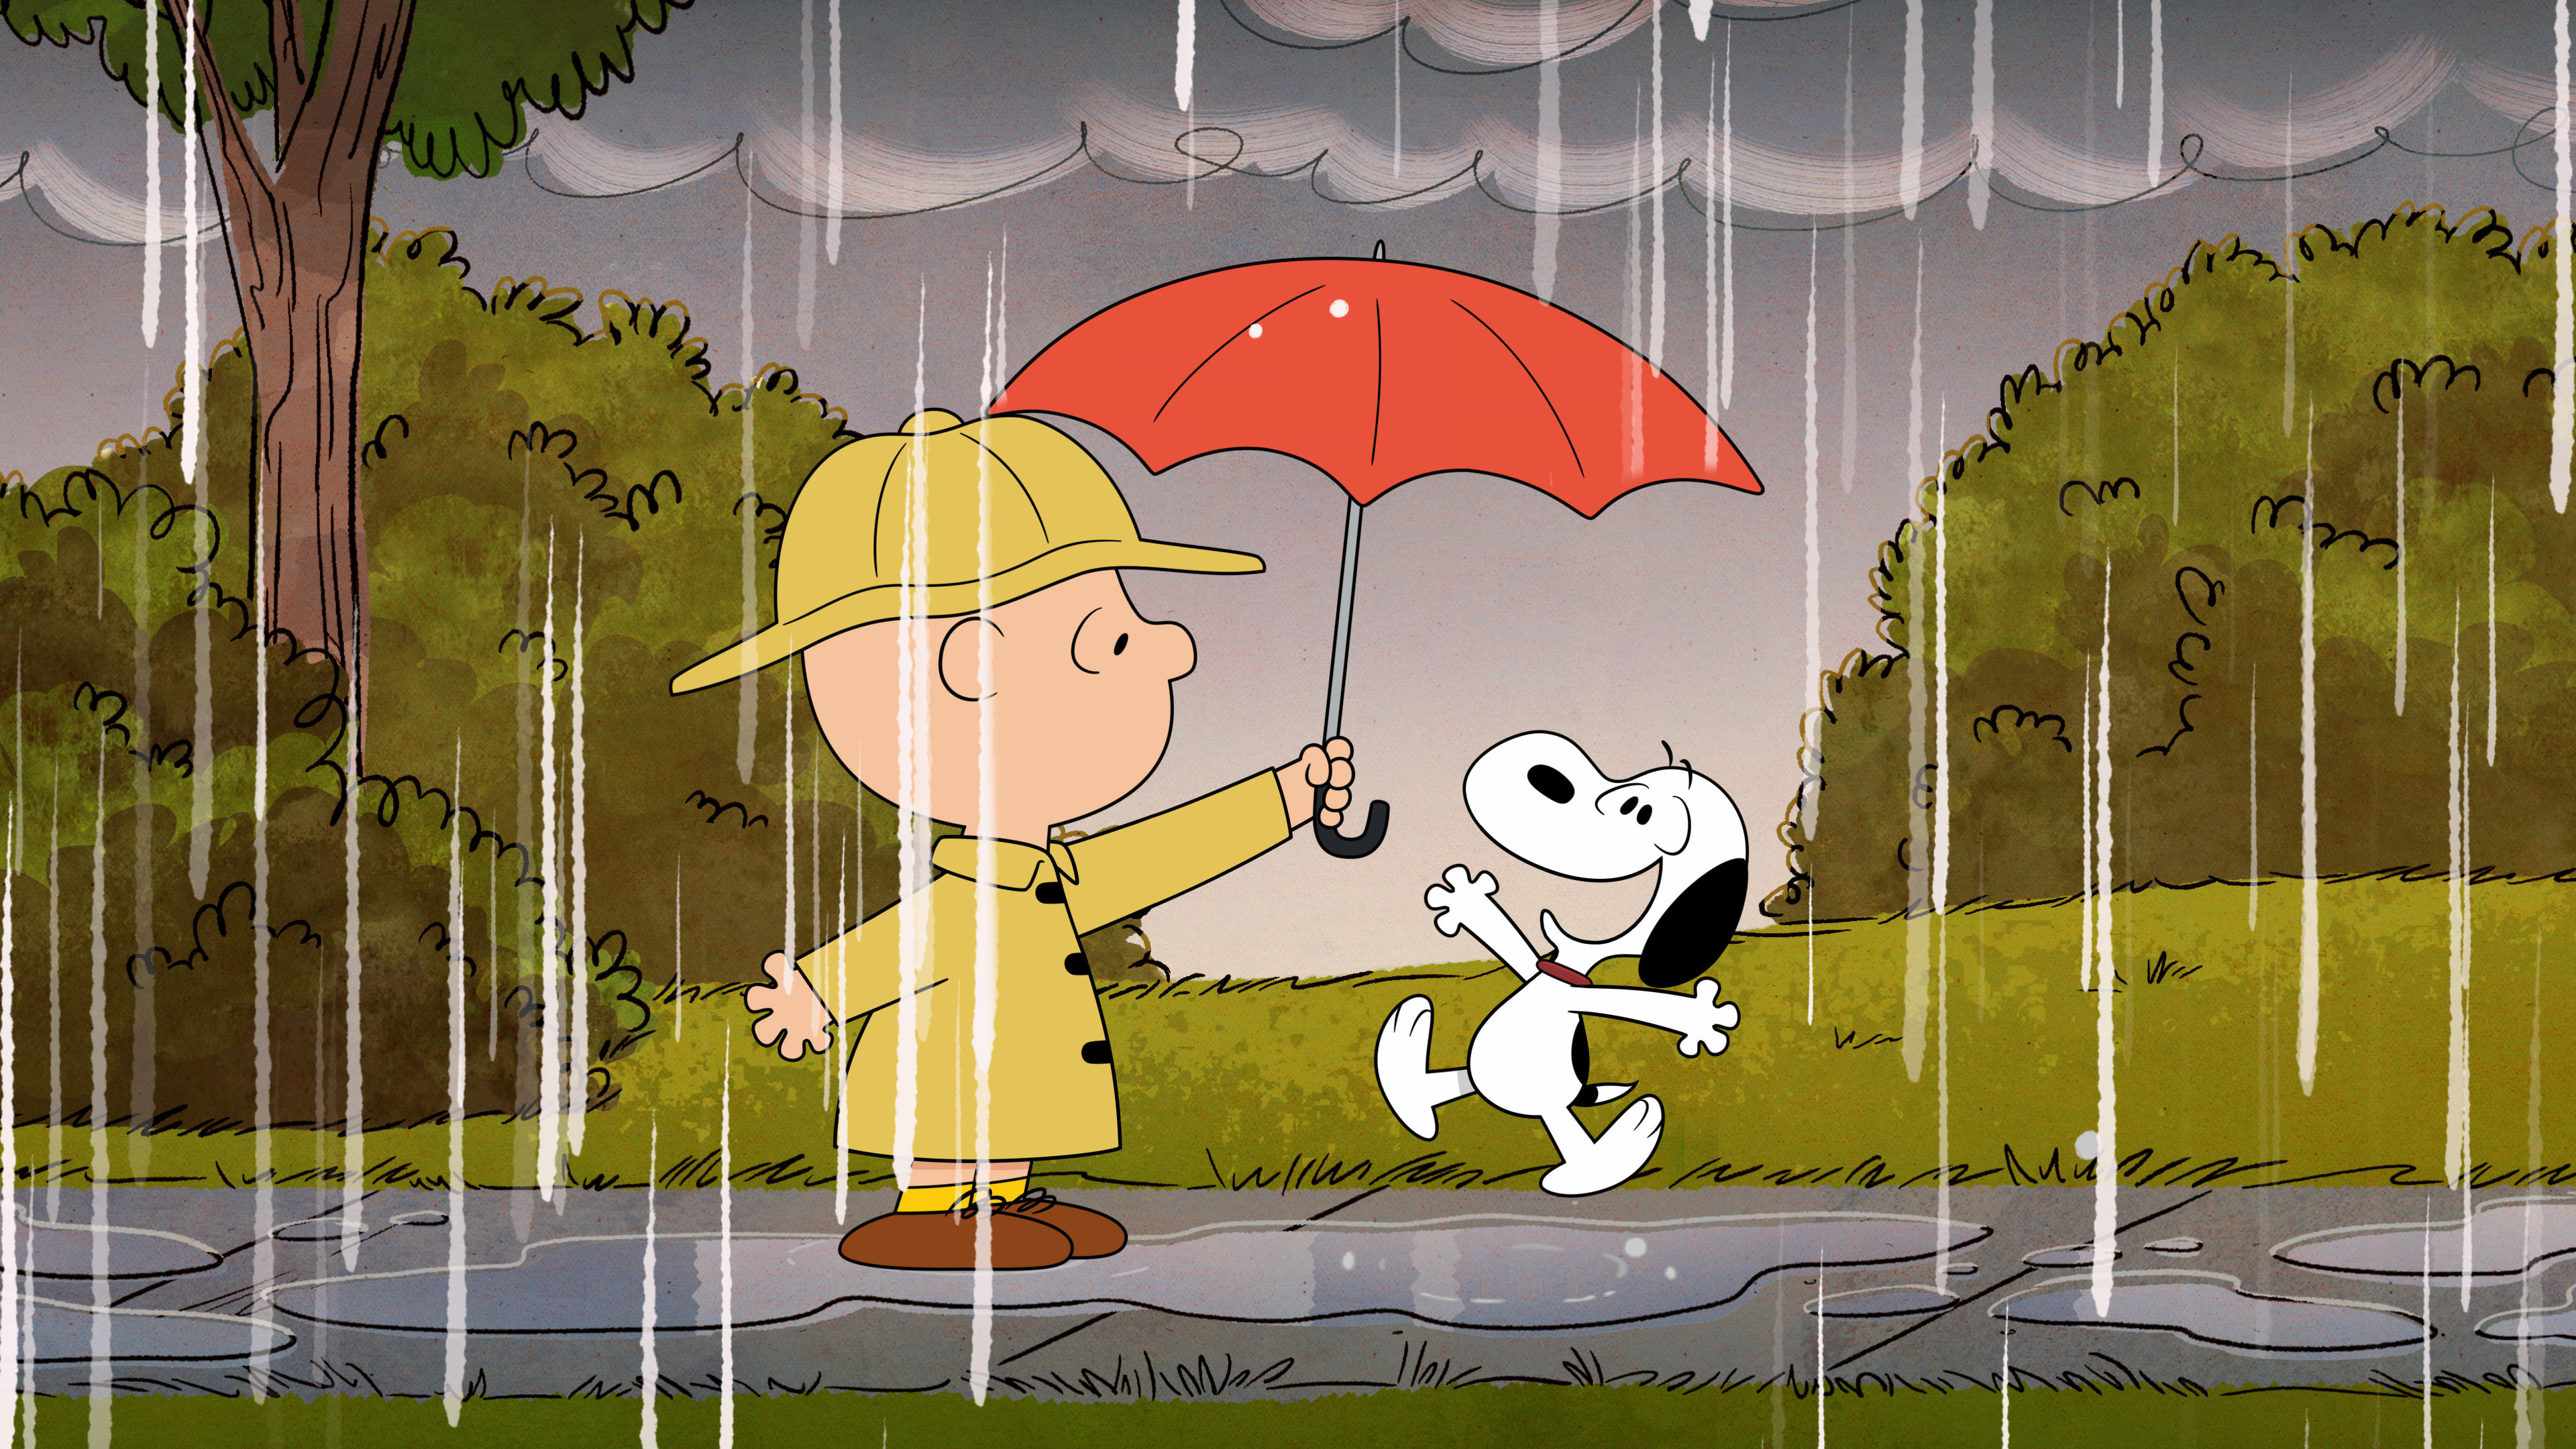 Download "Charlie Brown" wallpapers for mobile phone, free "Charlie Brown"  HD pictures